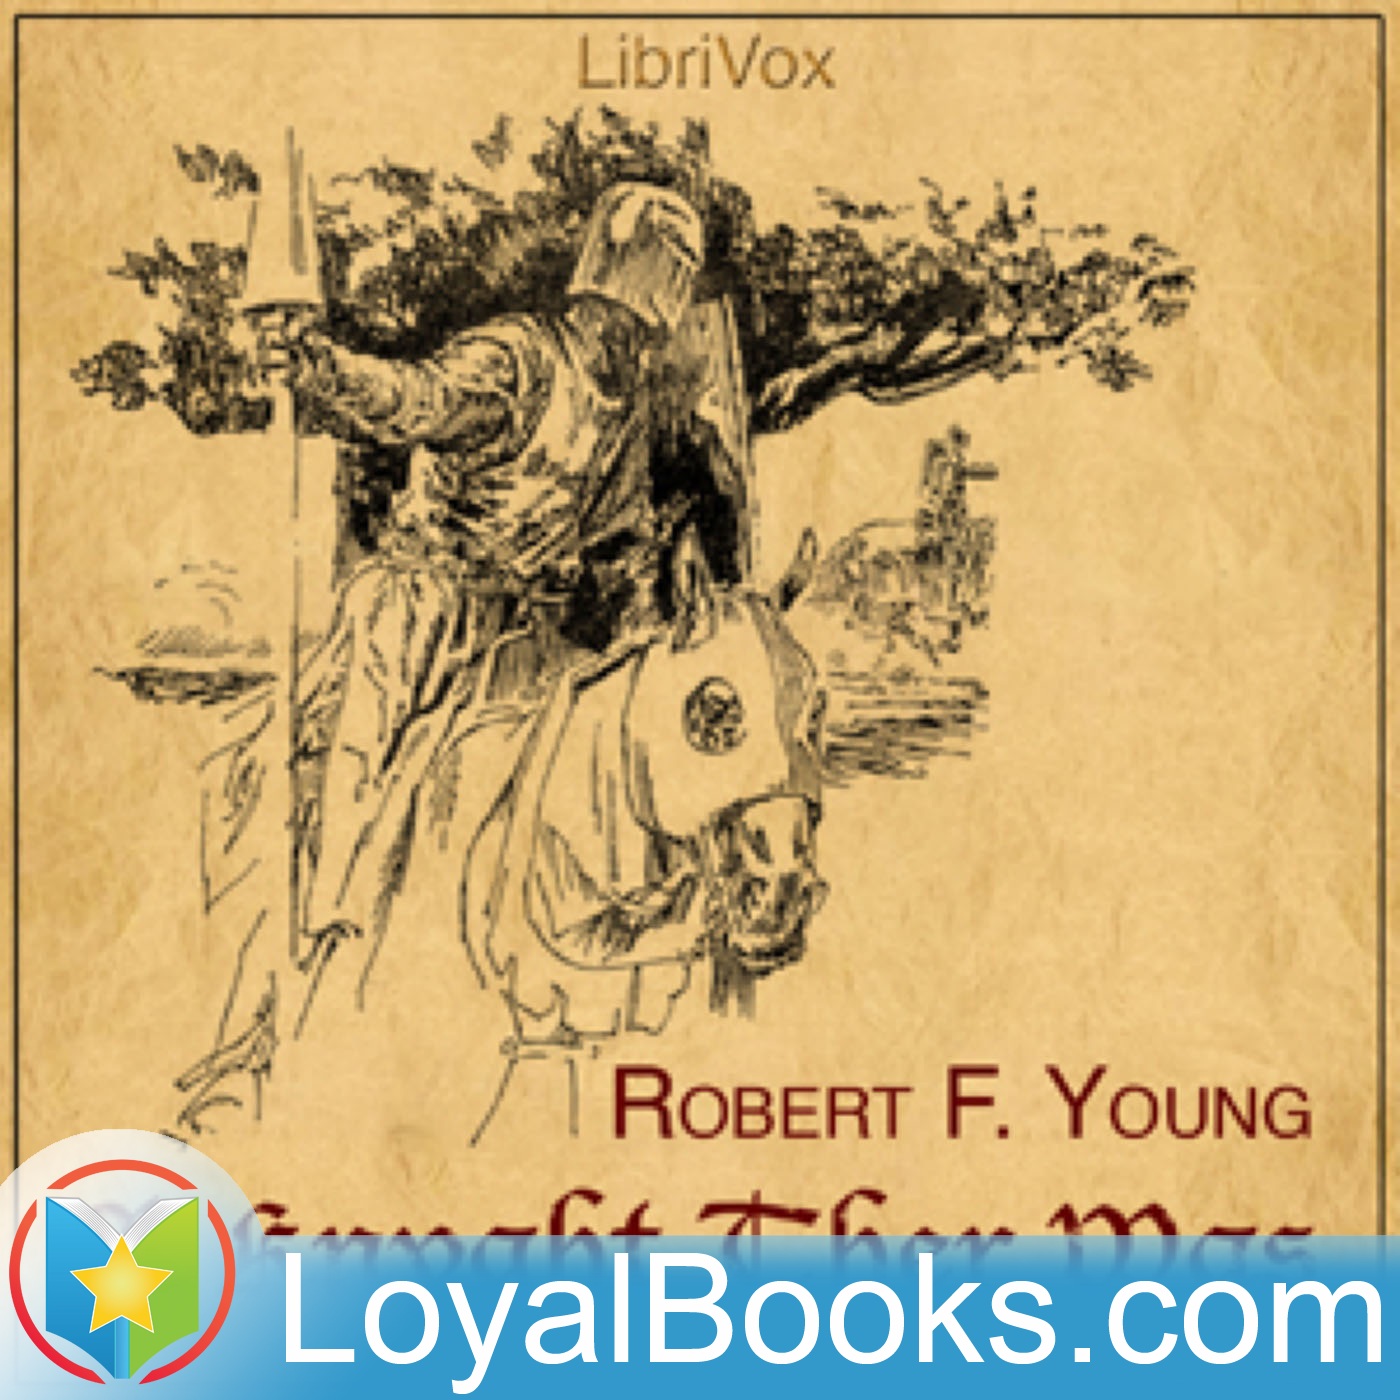 A Knyght Ther Was by Robert F. Young